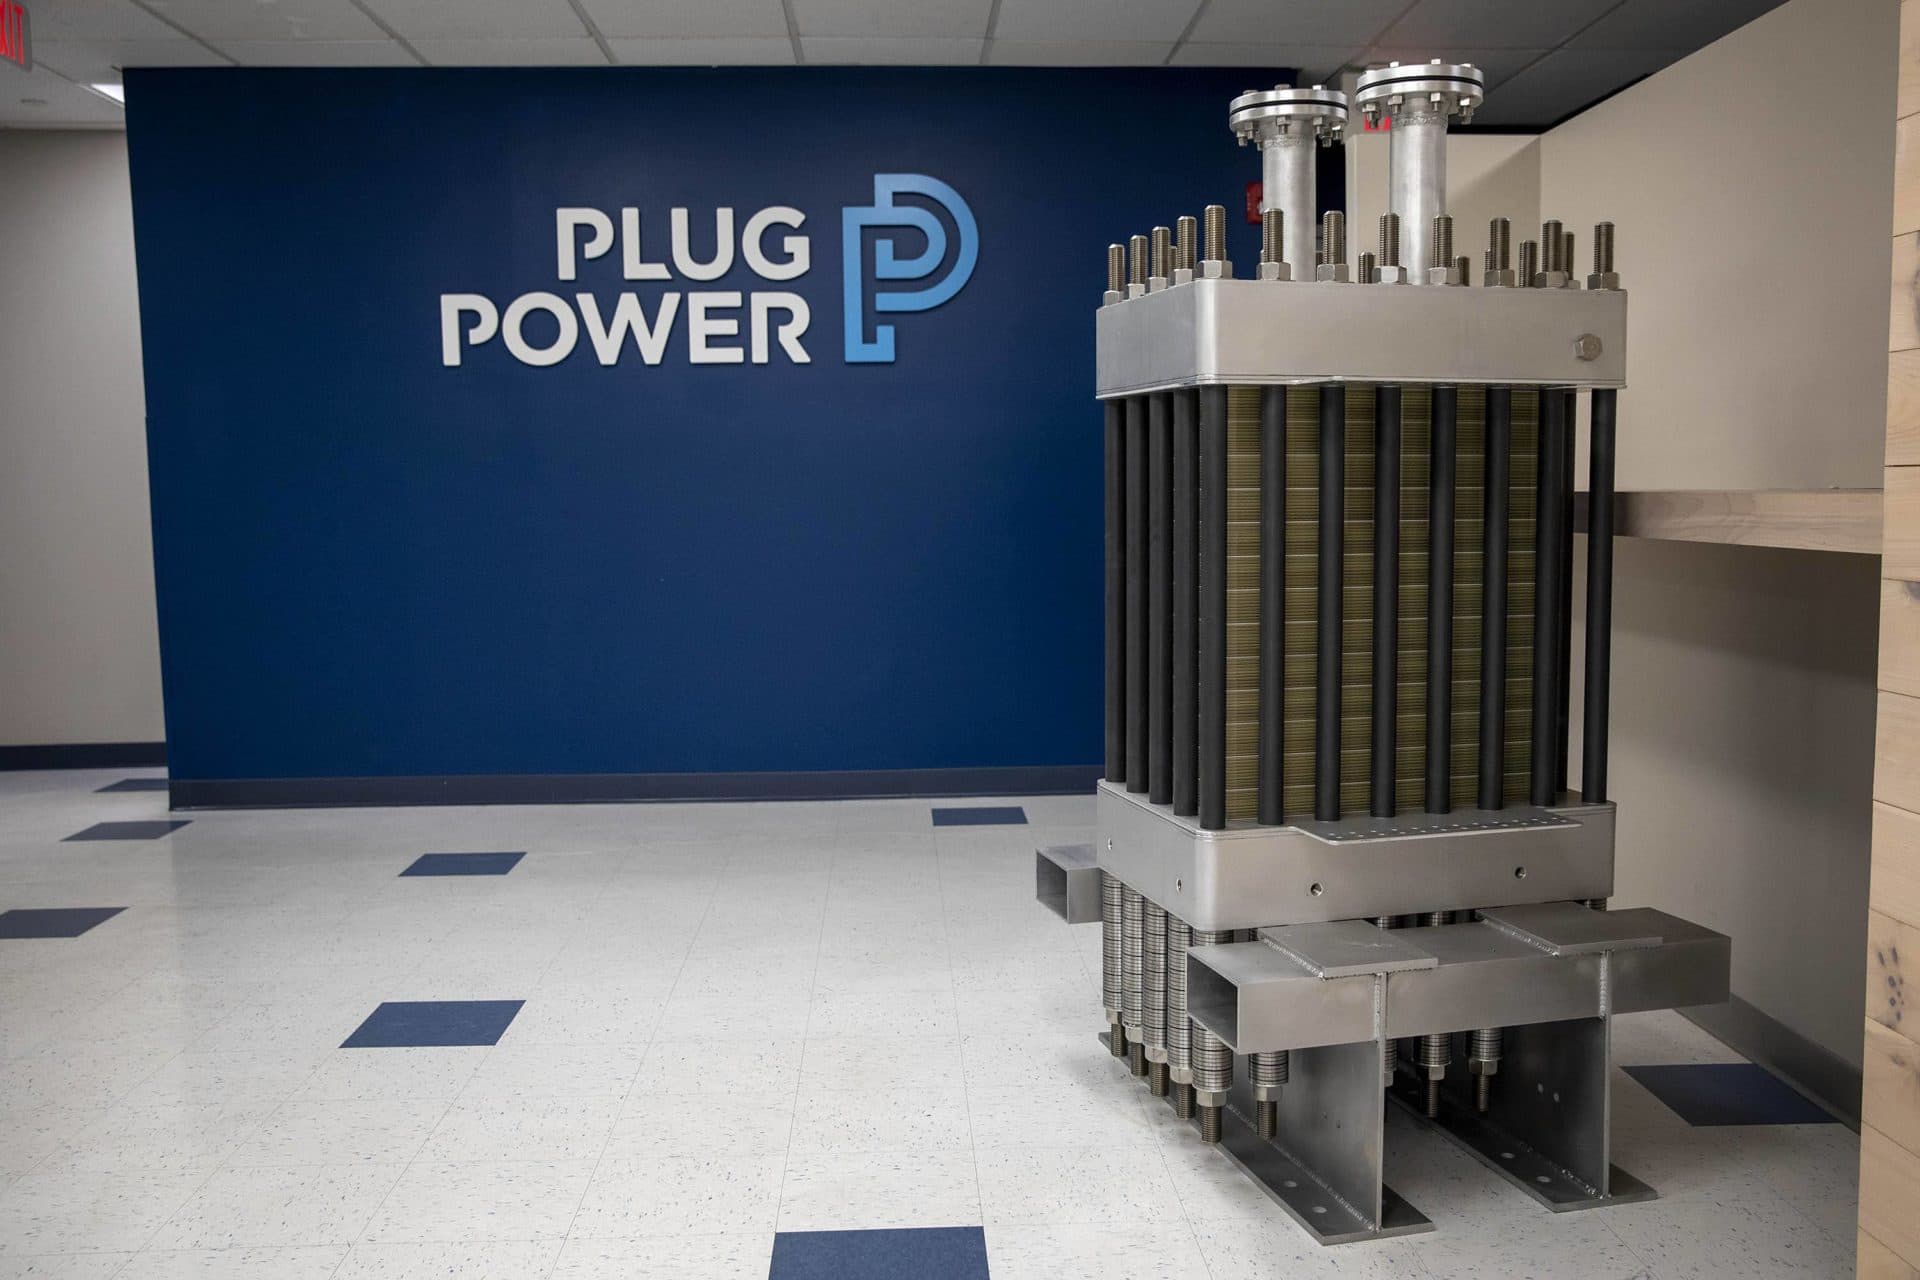 An Allagash electrolyzer stack stands at the entrance to Plug Power's workshops in Concord. (Robin Lubbock/WBUR)